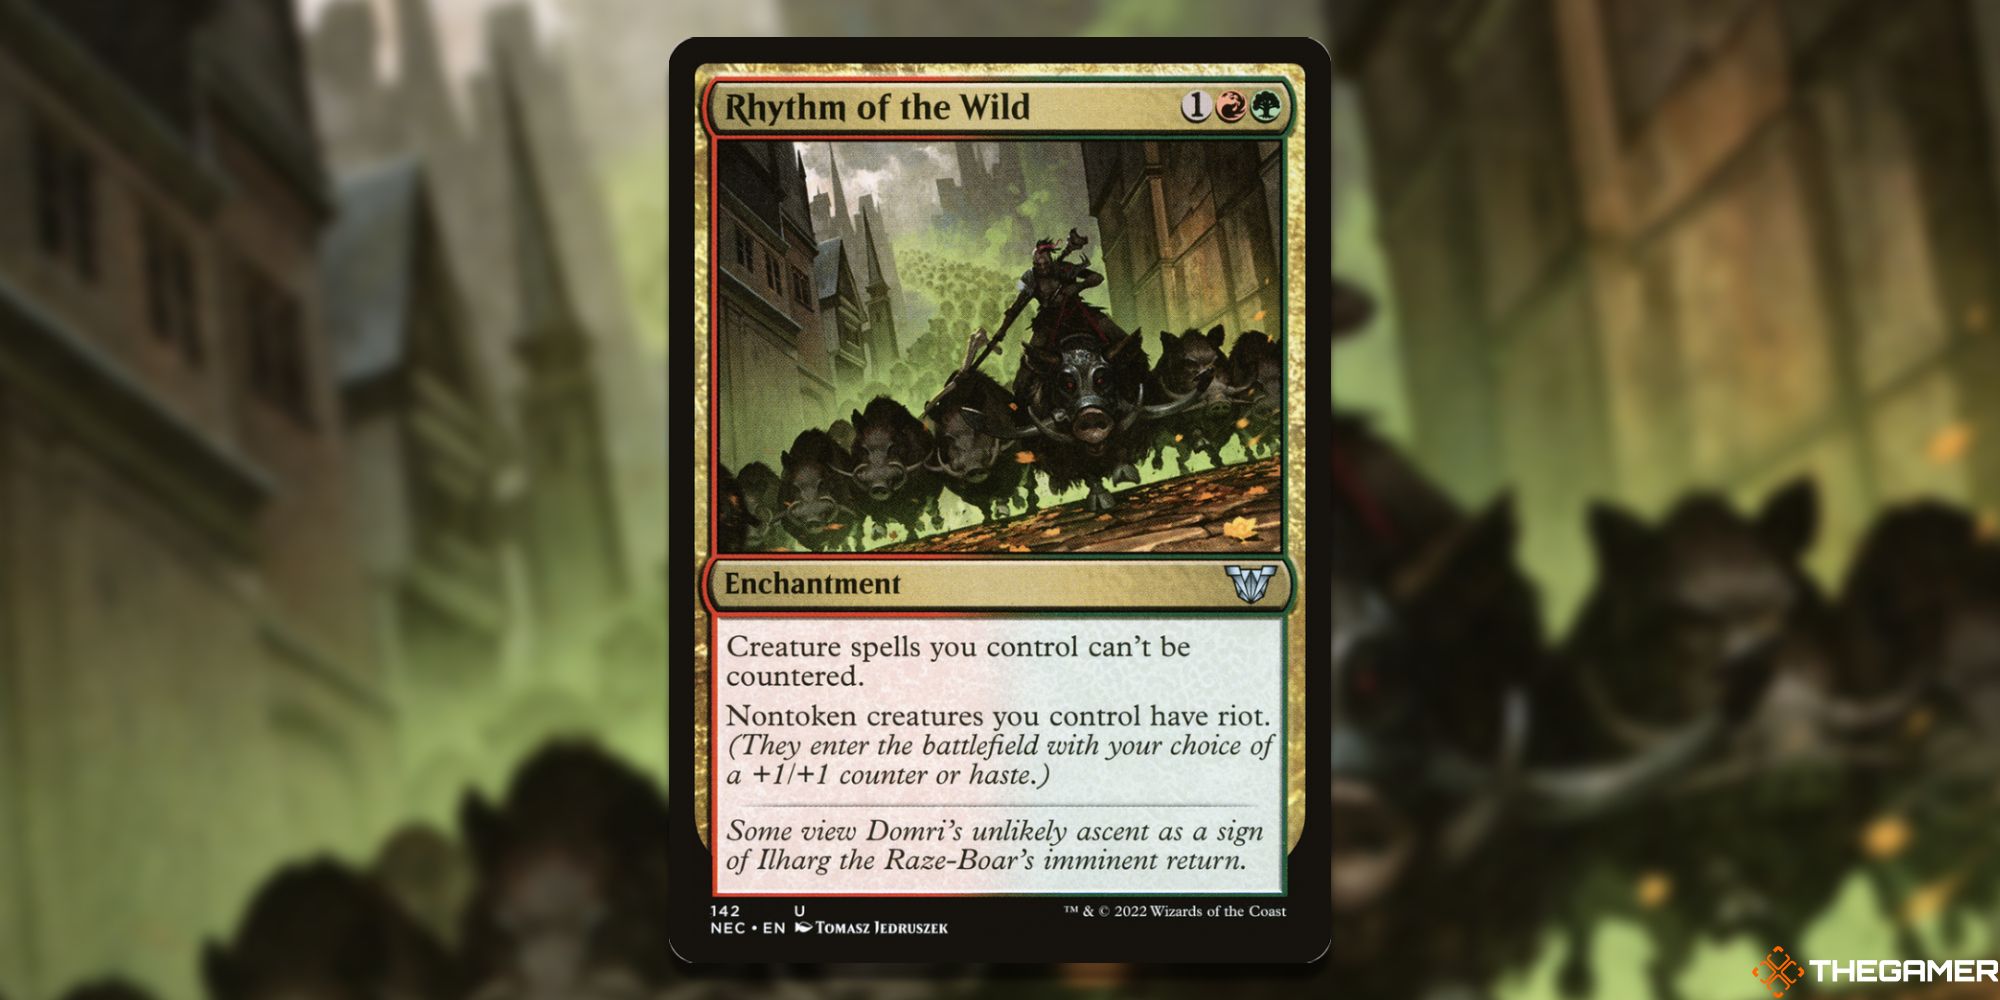 Image of the Rhythm of the Wild card in Magic: The Gathering, with art by Tomasz Jedruszek